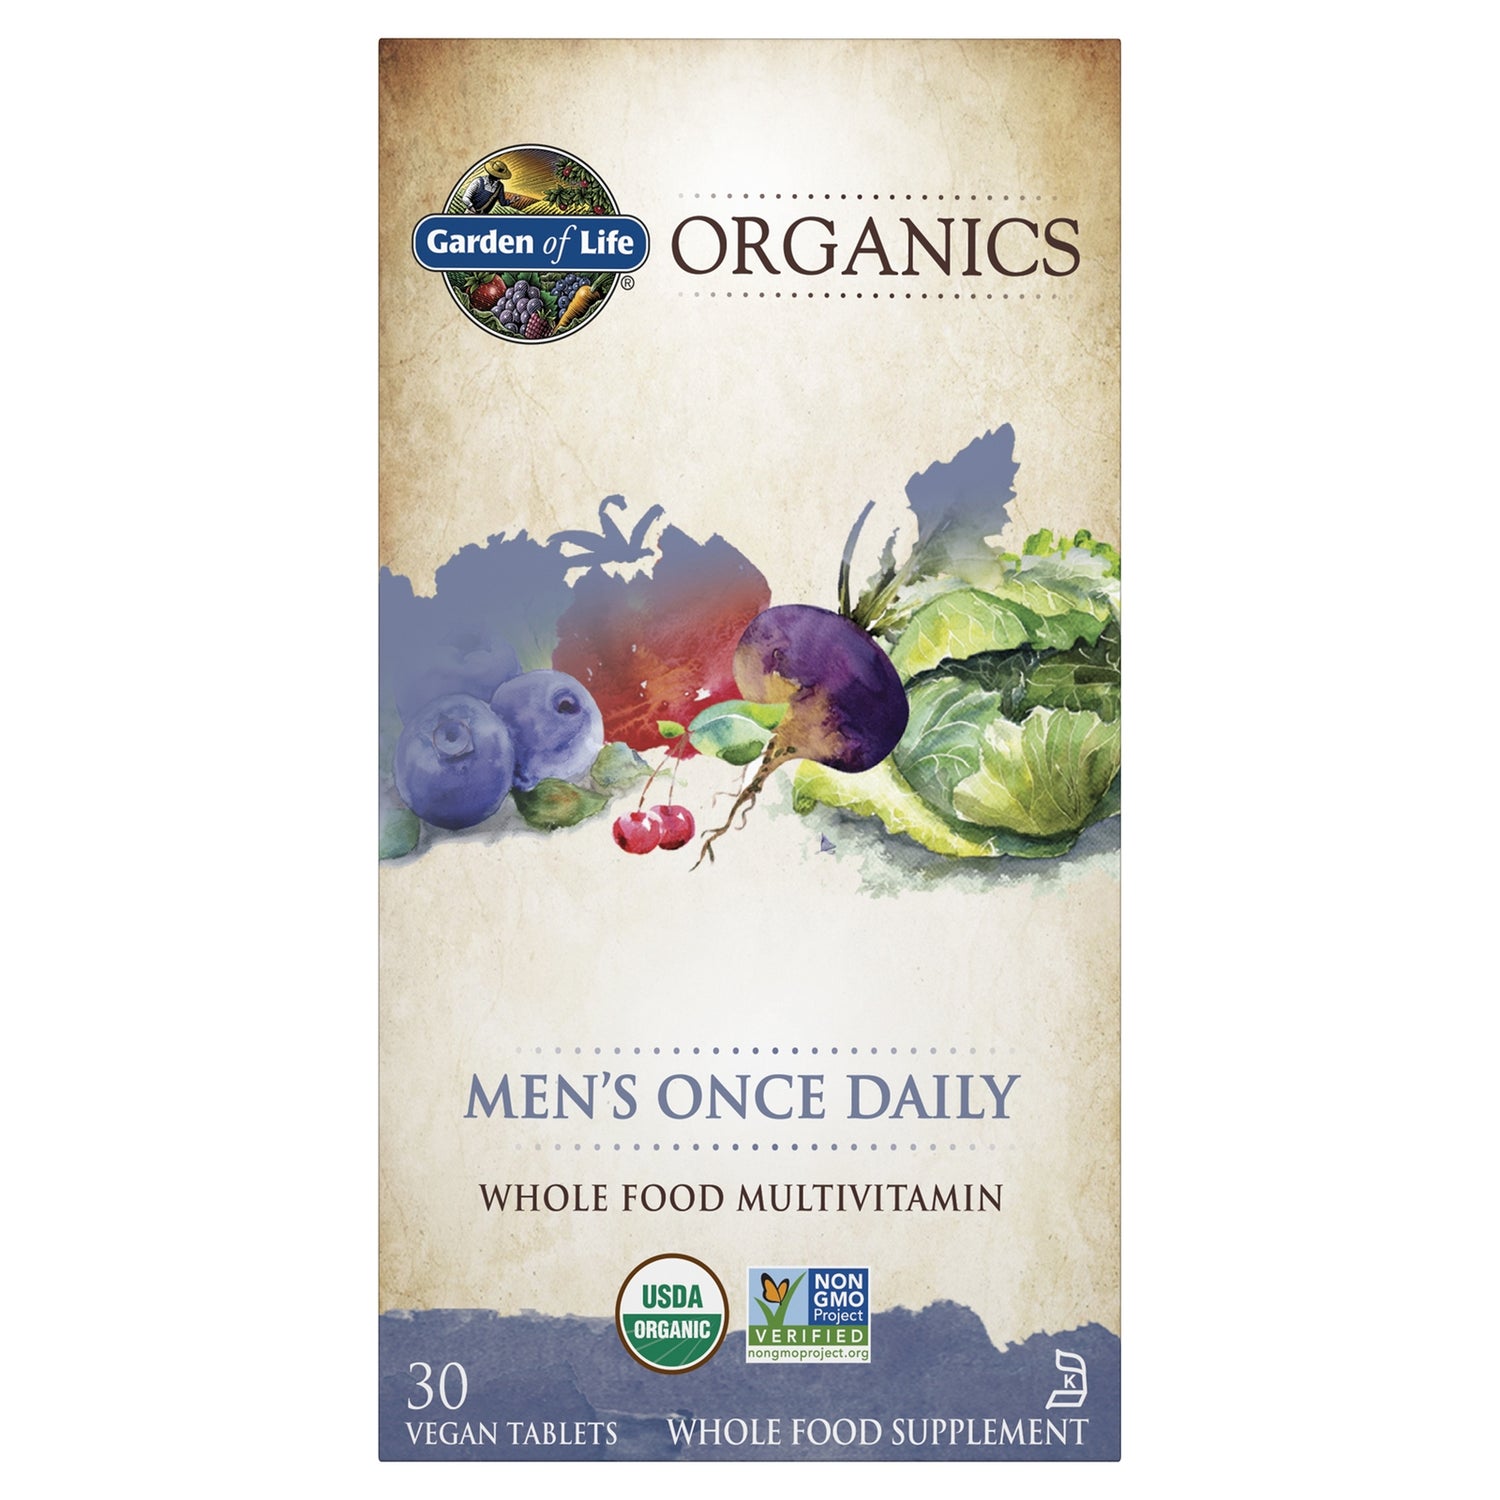 Organics Men's Once Daily - 30 Tablets